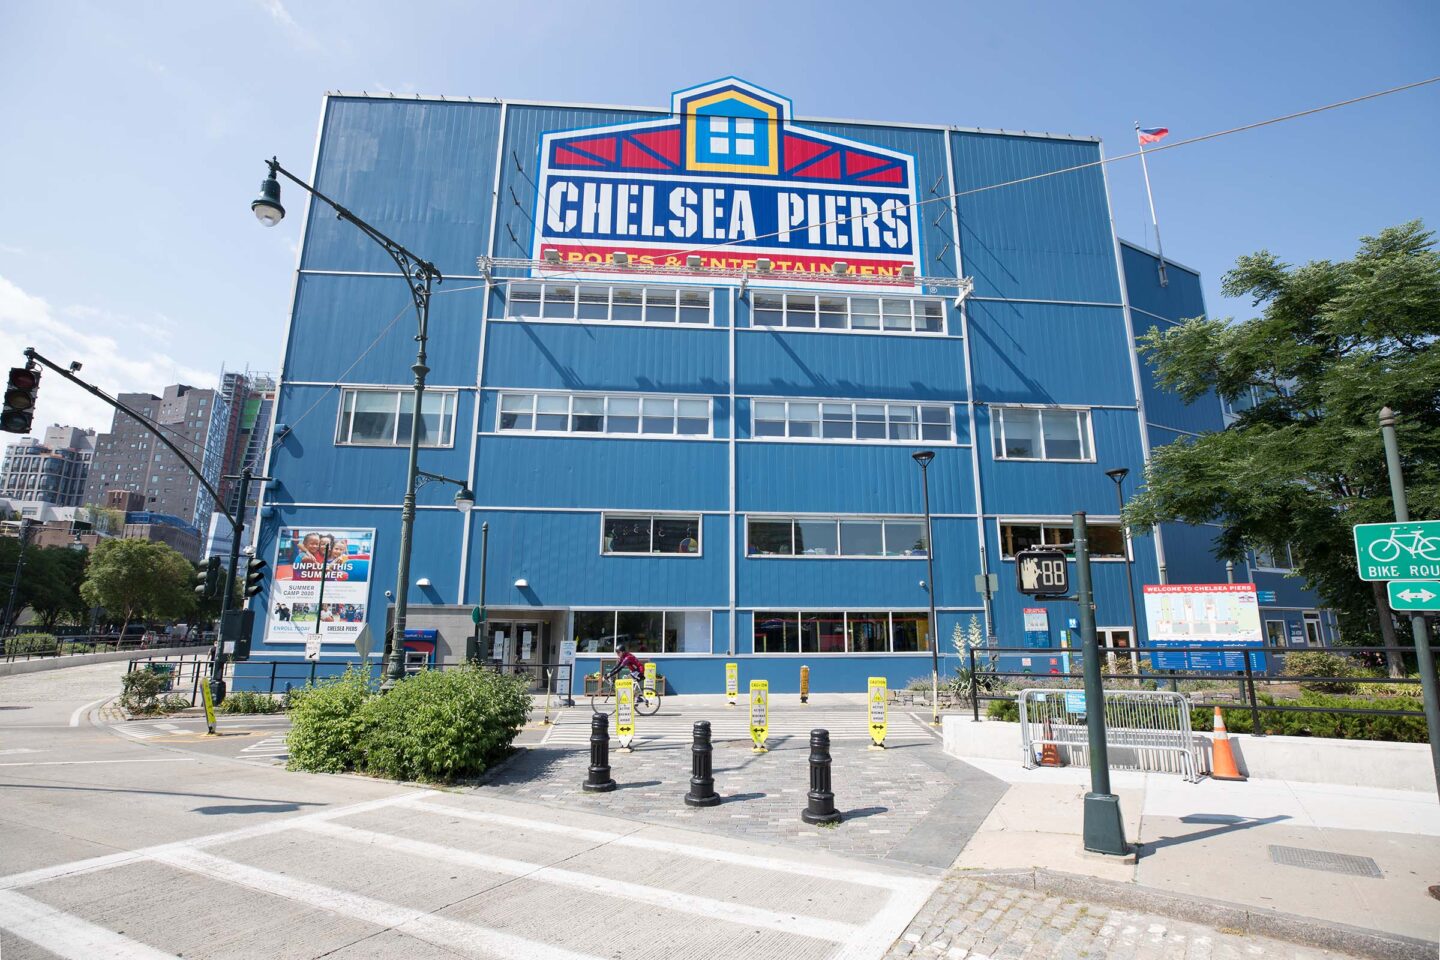 The large logo of Chelsea Piers on the blue building. The logo features a window and barn structure with Chelsea Piers written on it